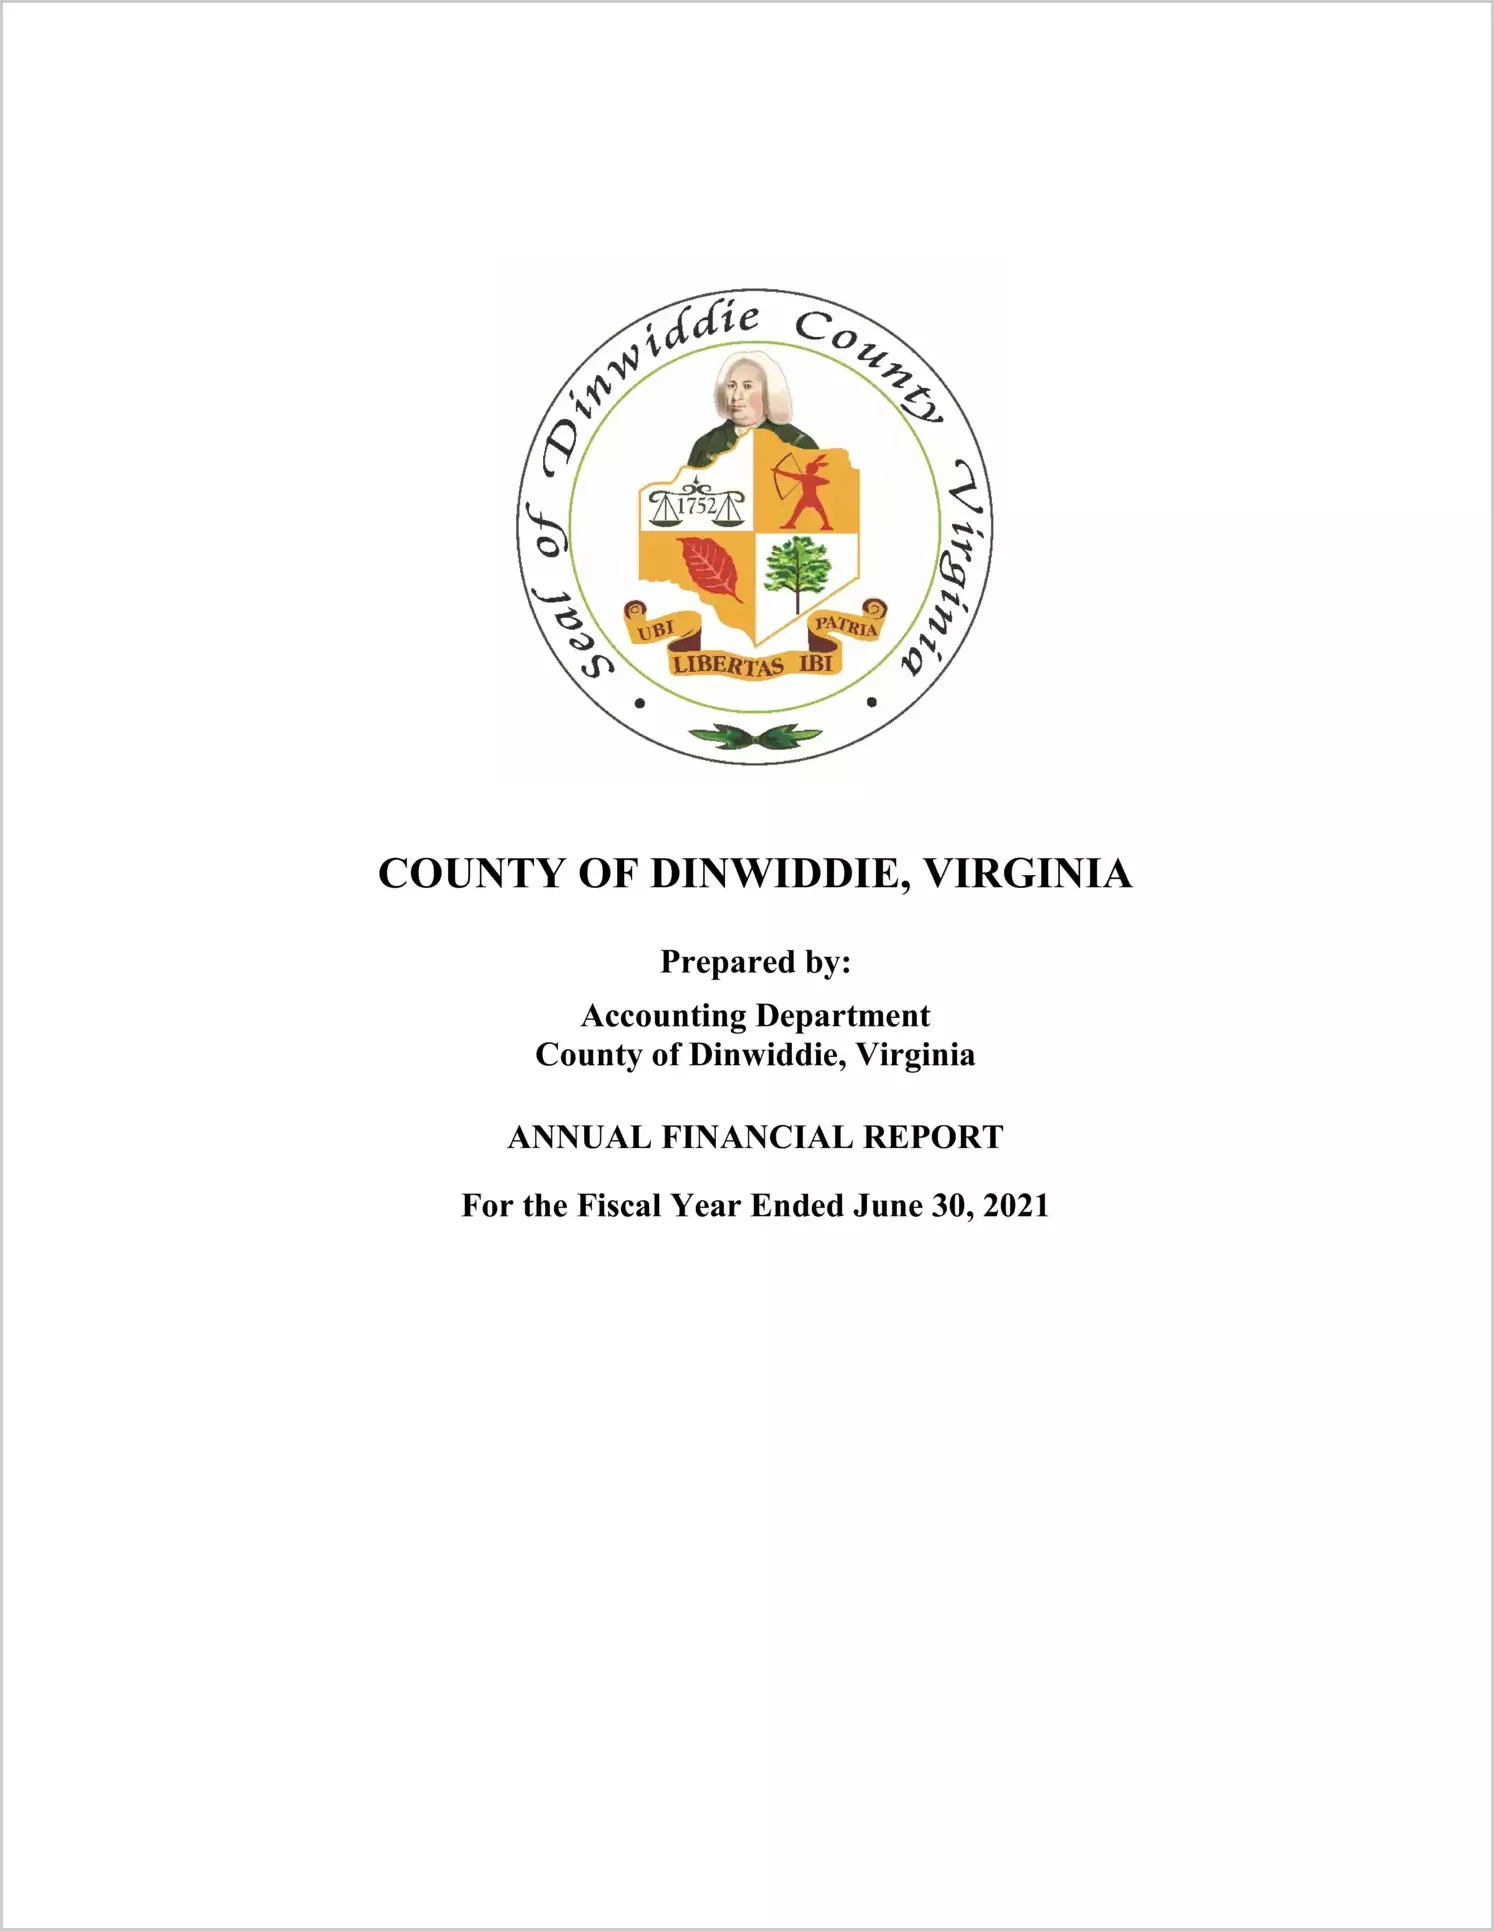 2021 Annual Financial Report for County of Dinwiddie